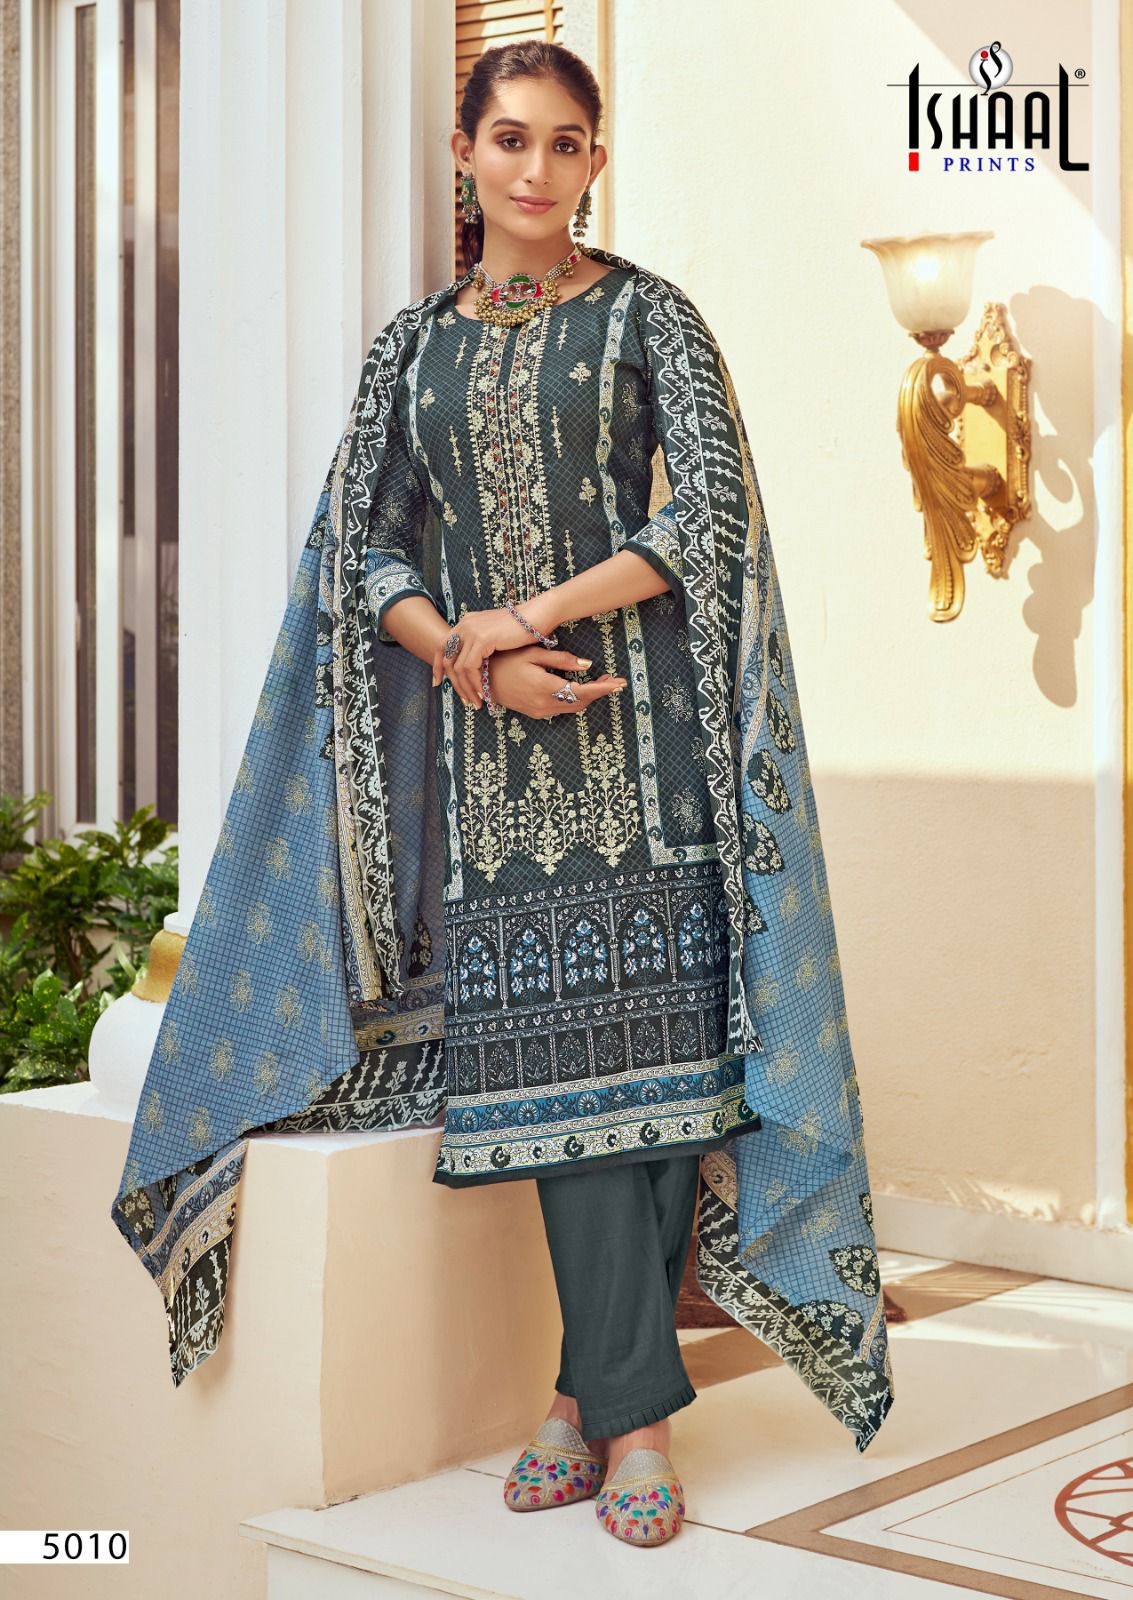 Ishaal Print Embroidered Vol  5 collection 8